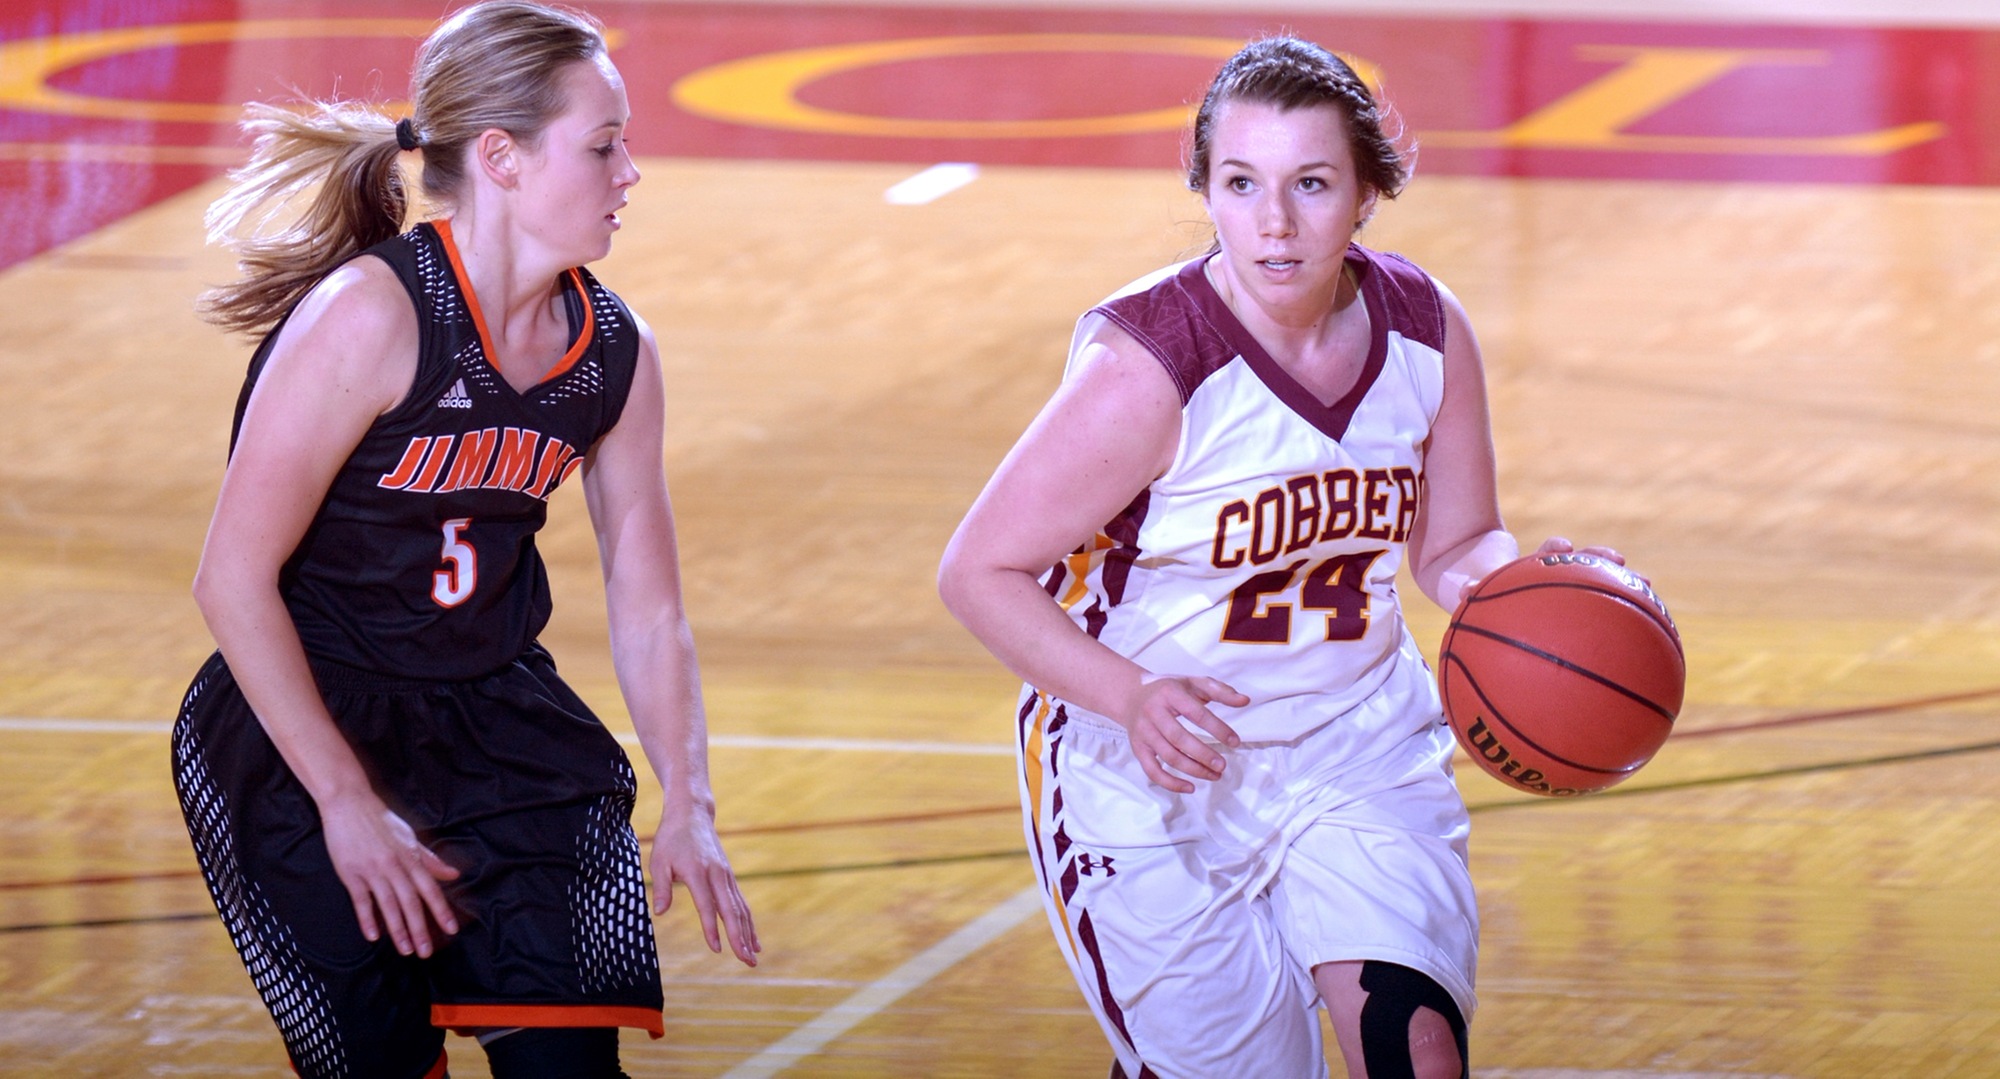 Junior Cassidy Rahman had a career-high 14 points and went 4-for-7 from 3-point range to help the Cobbers beat Hamline 73-65.